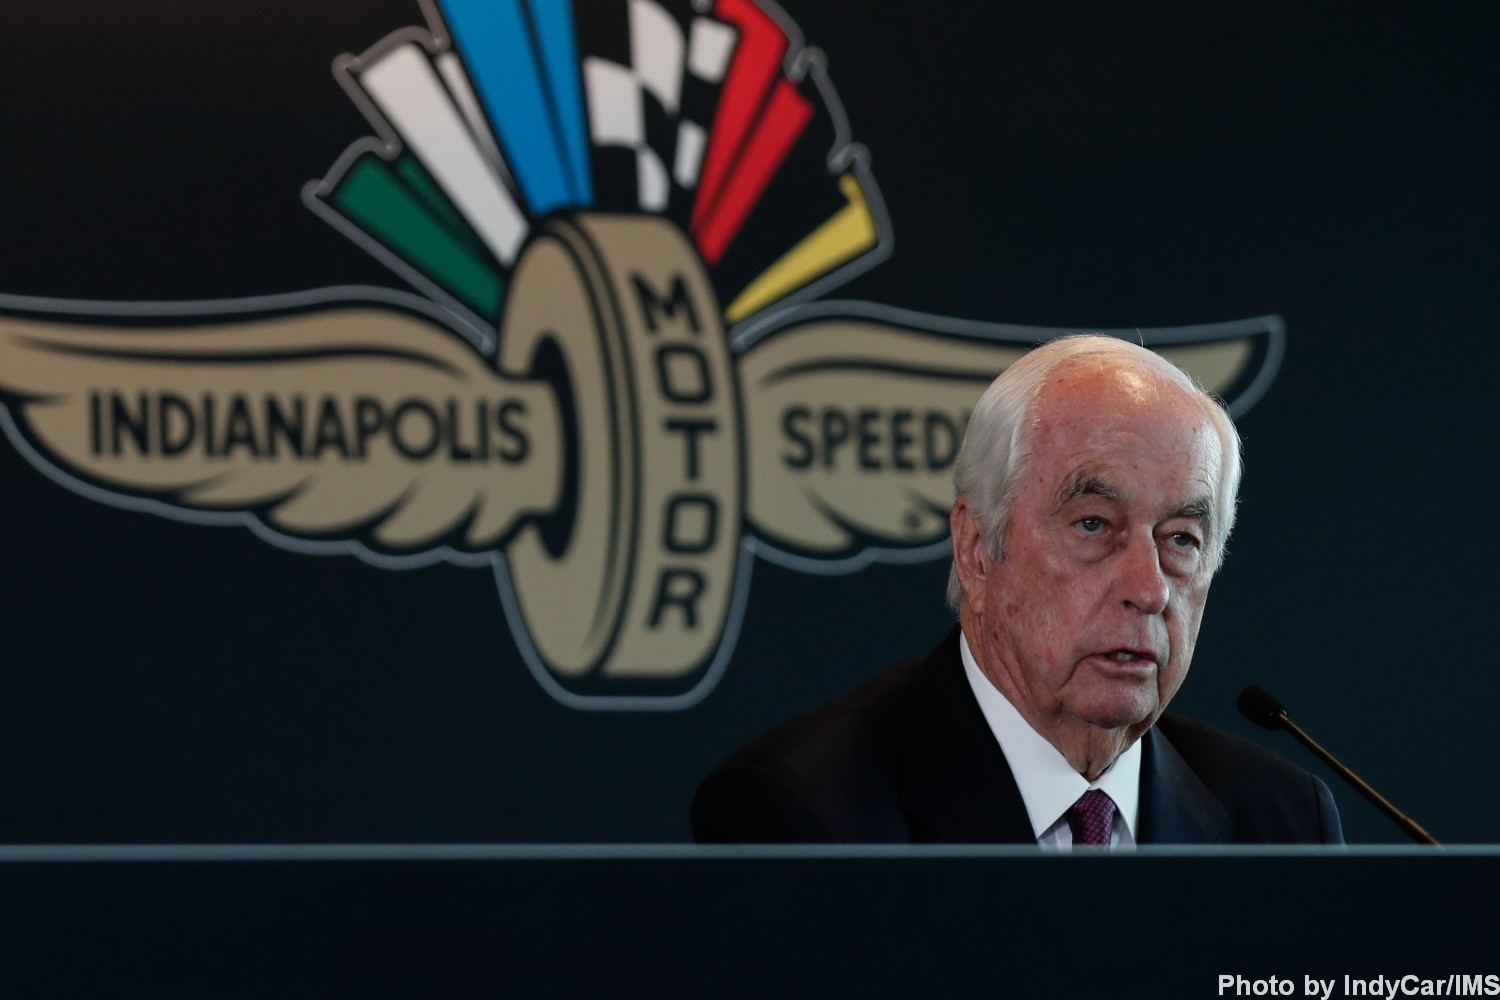 Penske will look at adding a 24-Hour race at the Speedway